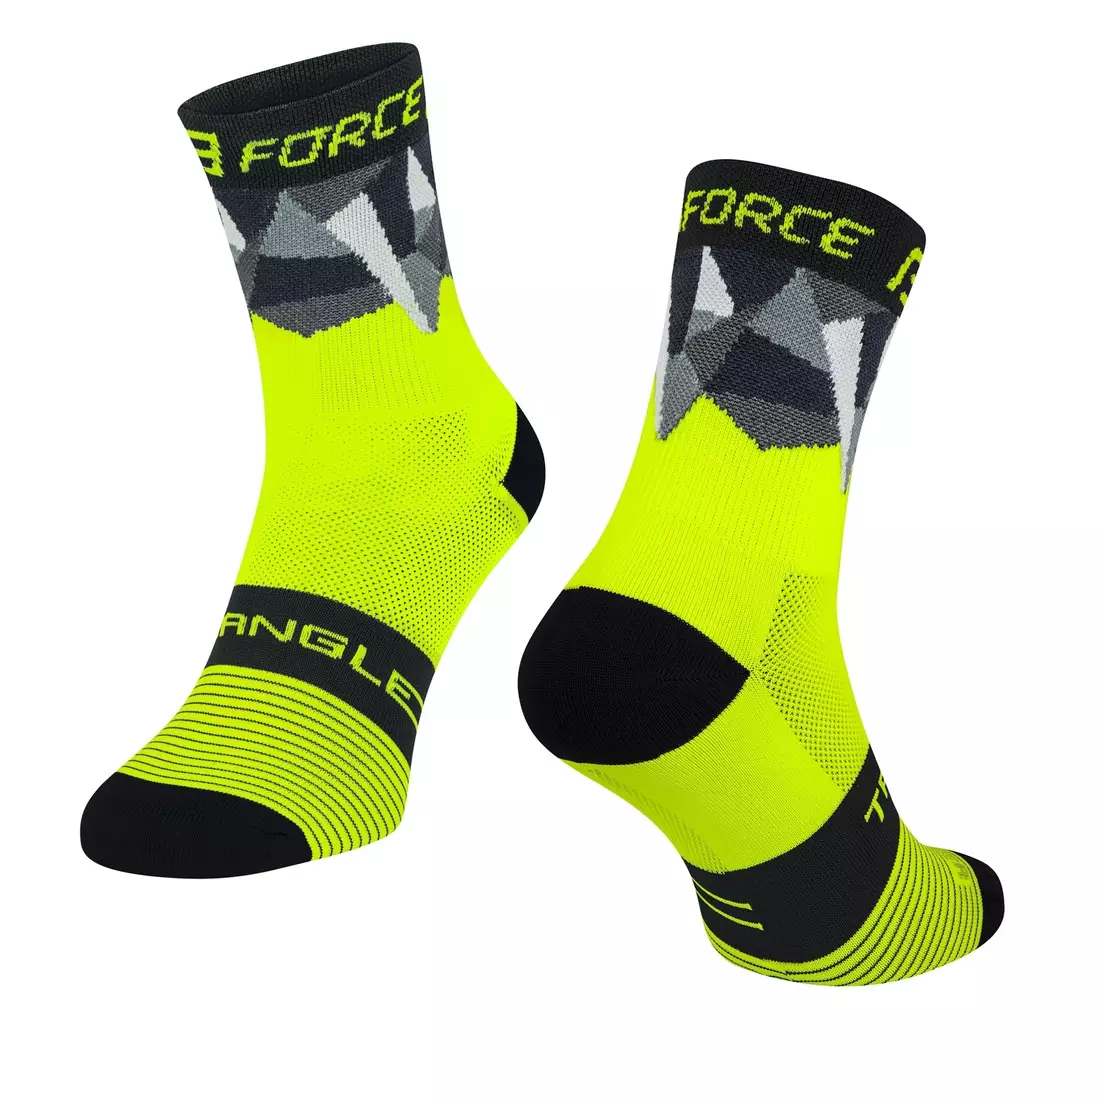 FORCE TRIANGLE cycling/sports socks, fluo-black